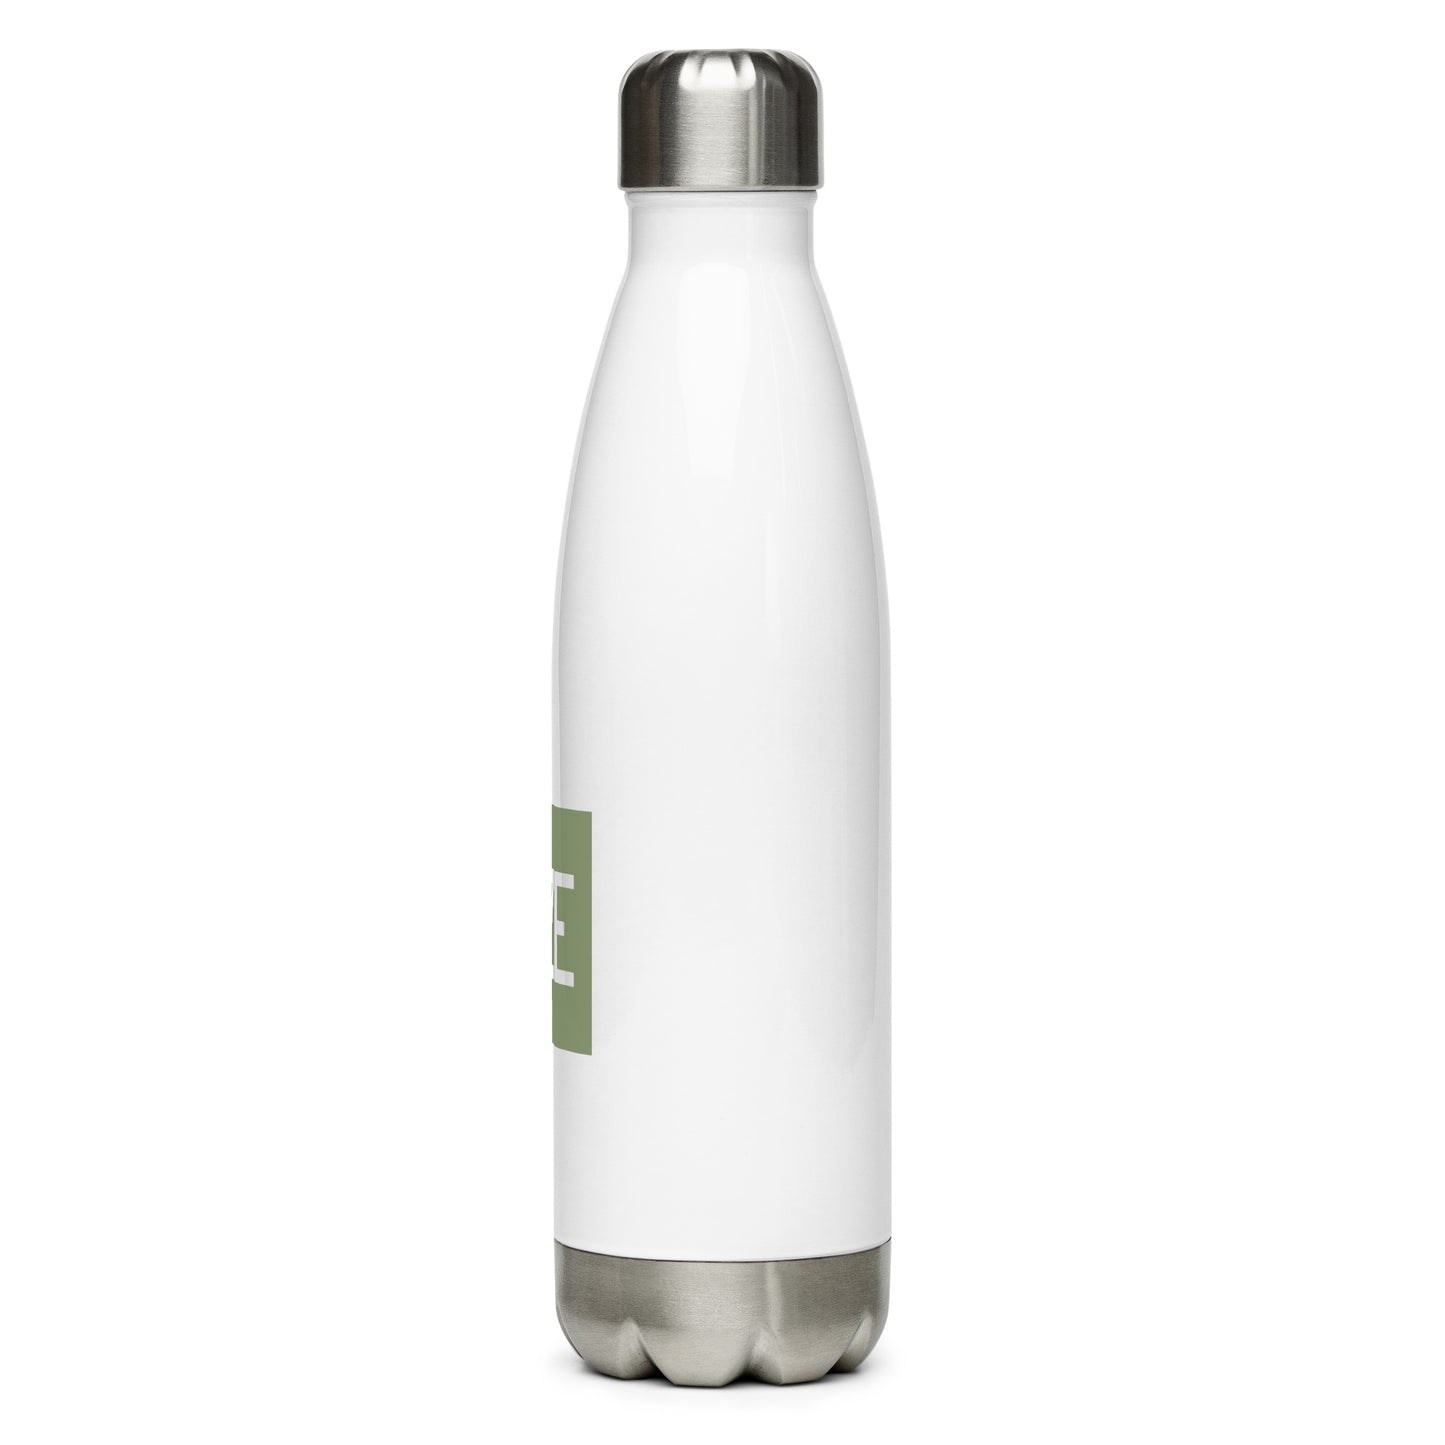 Aviation Gift Water Bottle - Camo Green • EZE Buenos Aires • YHM Designs - Image 08